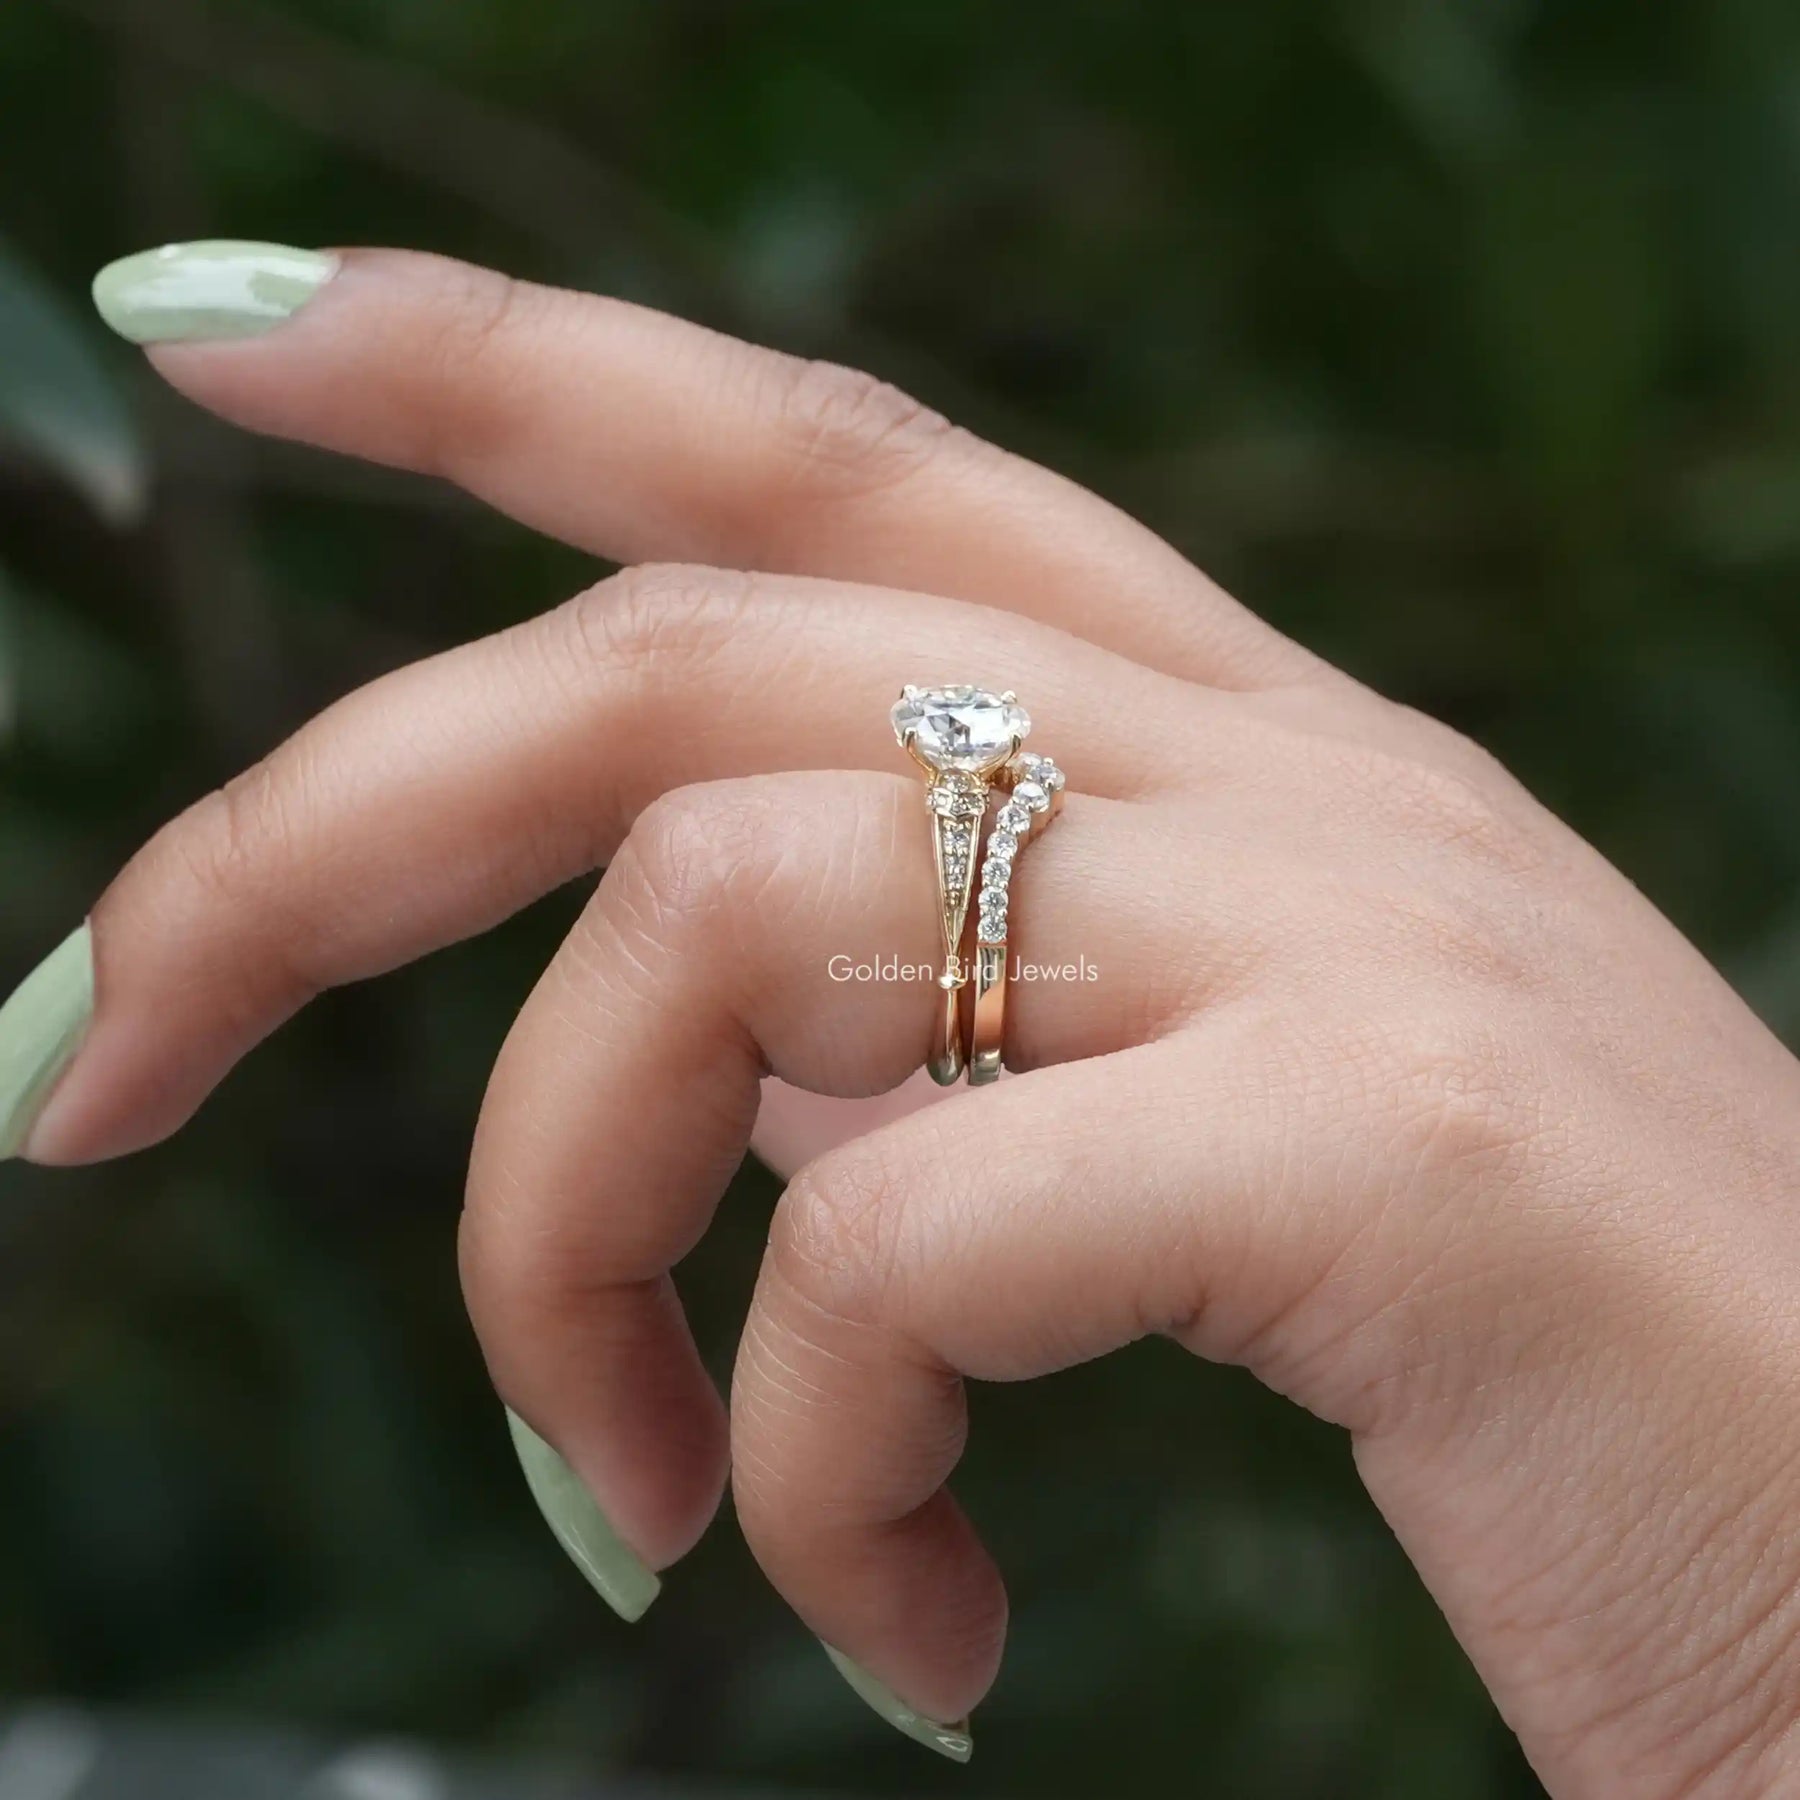 [In finger side view of moissanite round cut accent stone ring]-[Golden Bird Jewels]